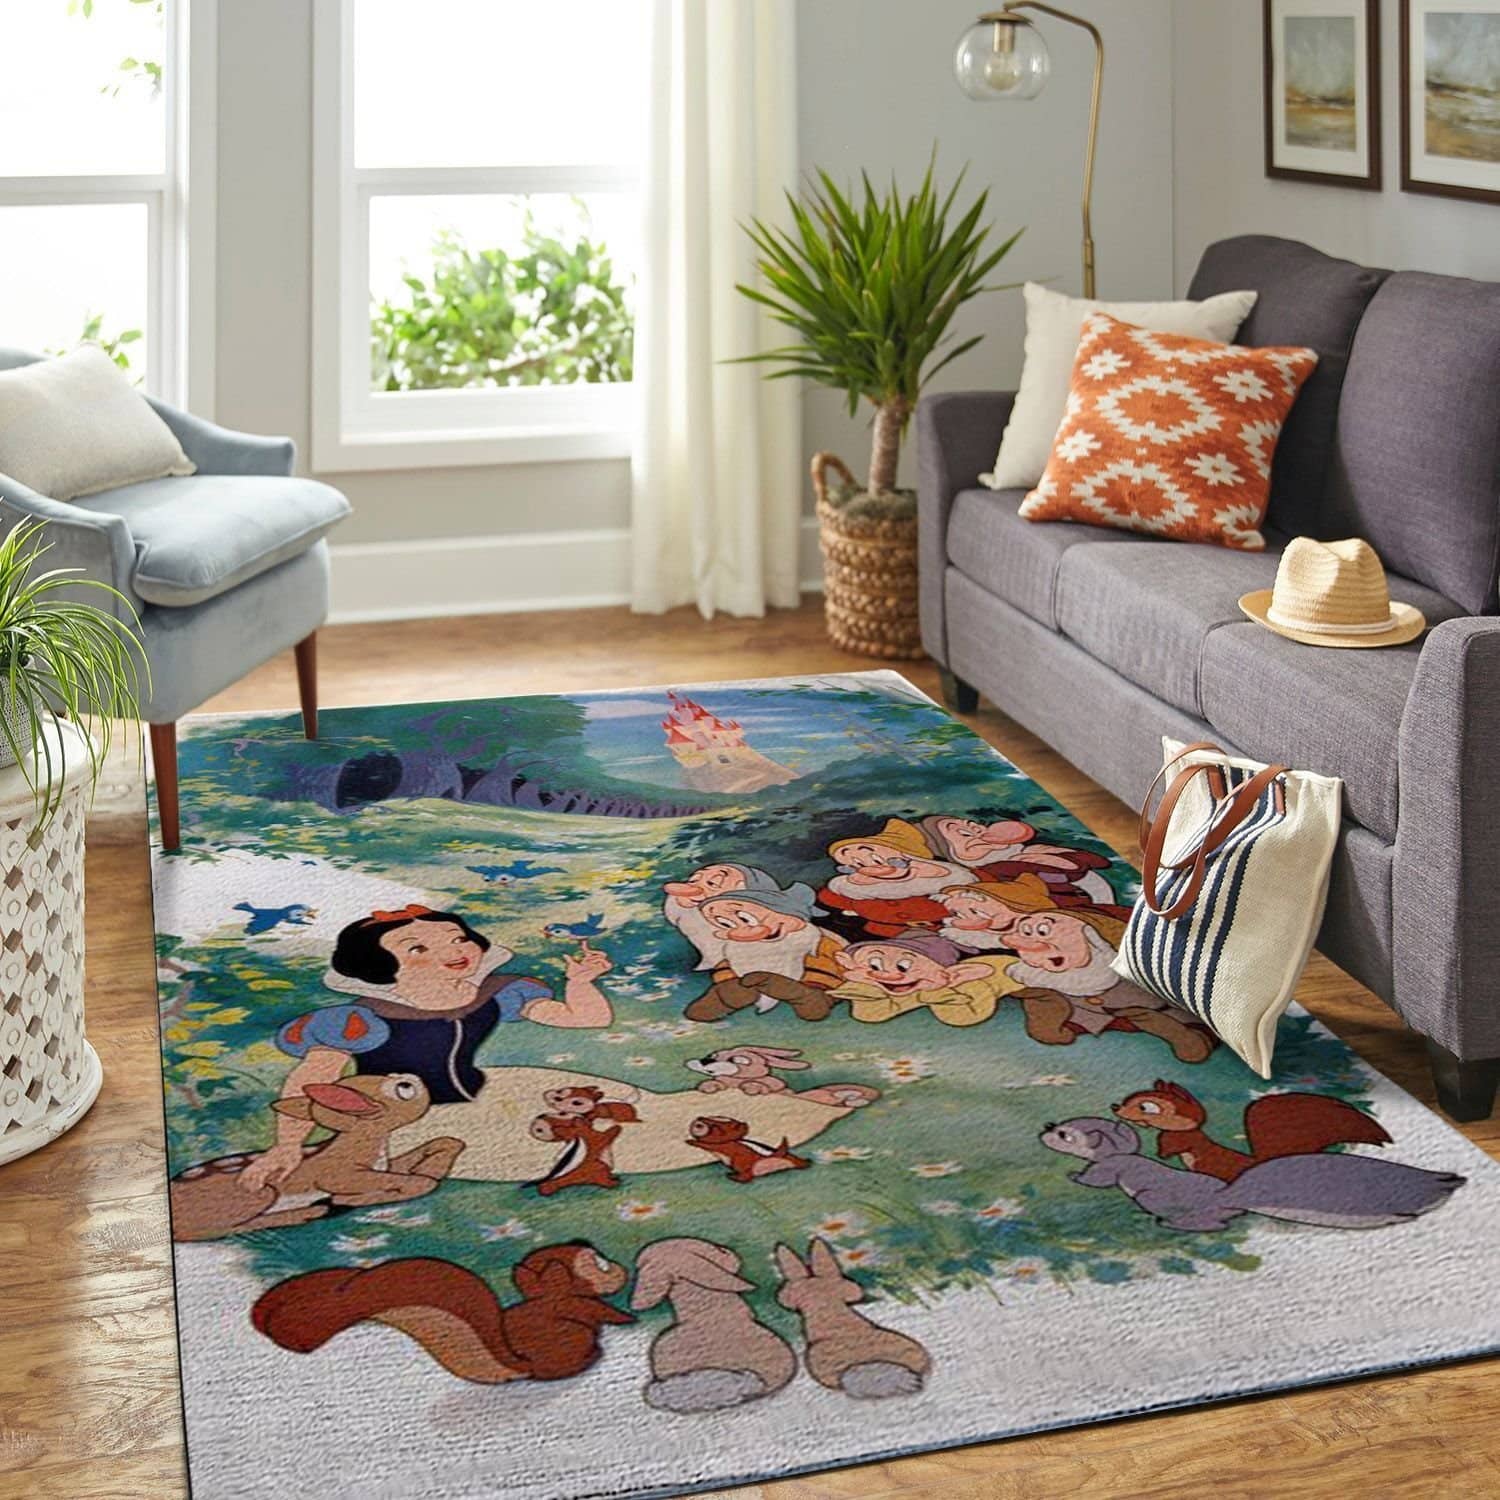 Amazon Snow White And Seven Dwarfs Living Room Area No6569 Rug